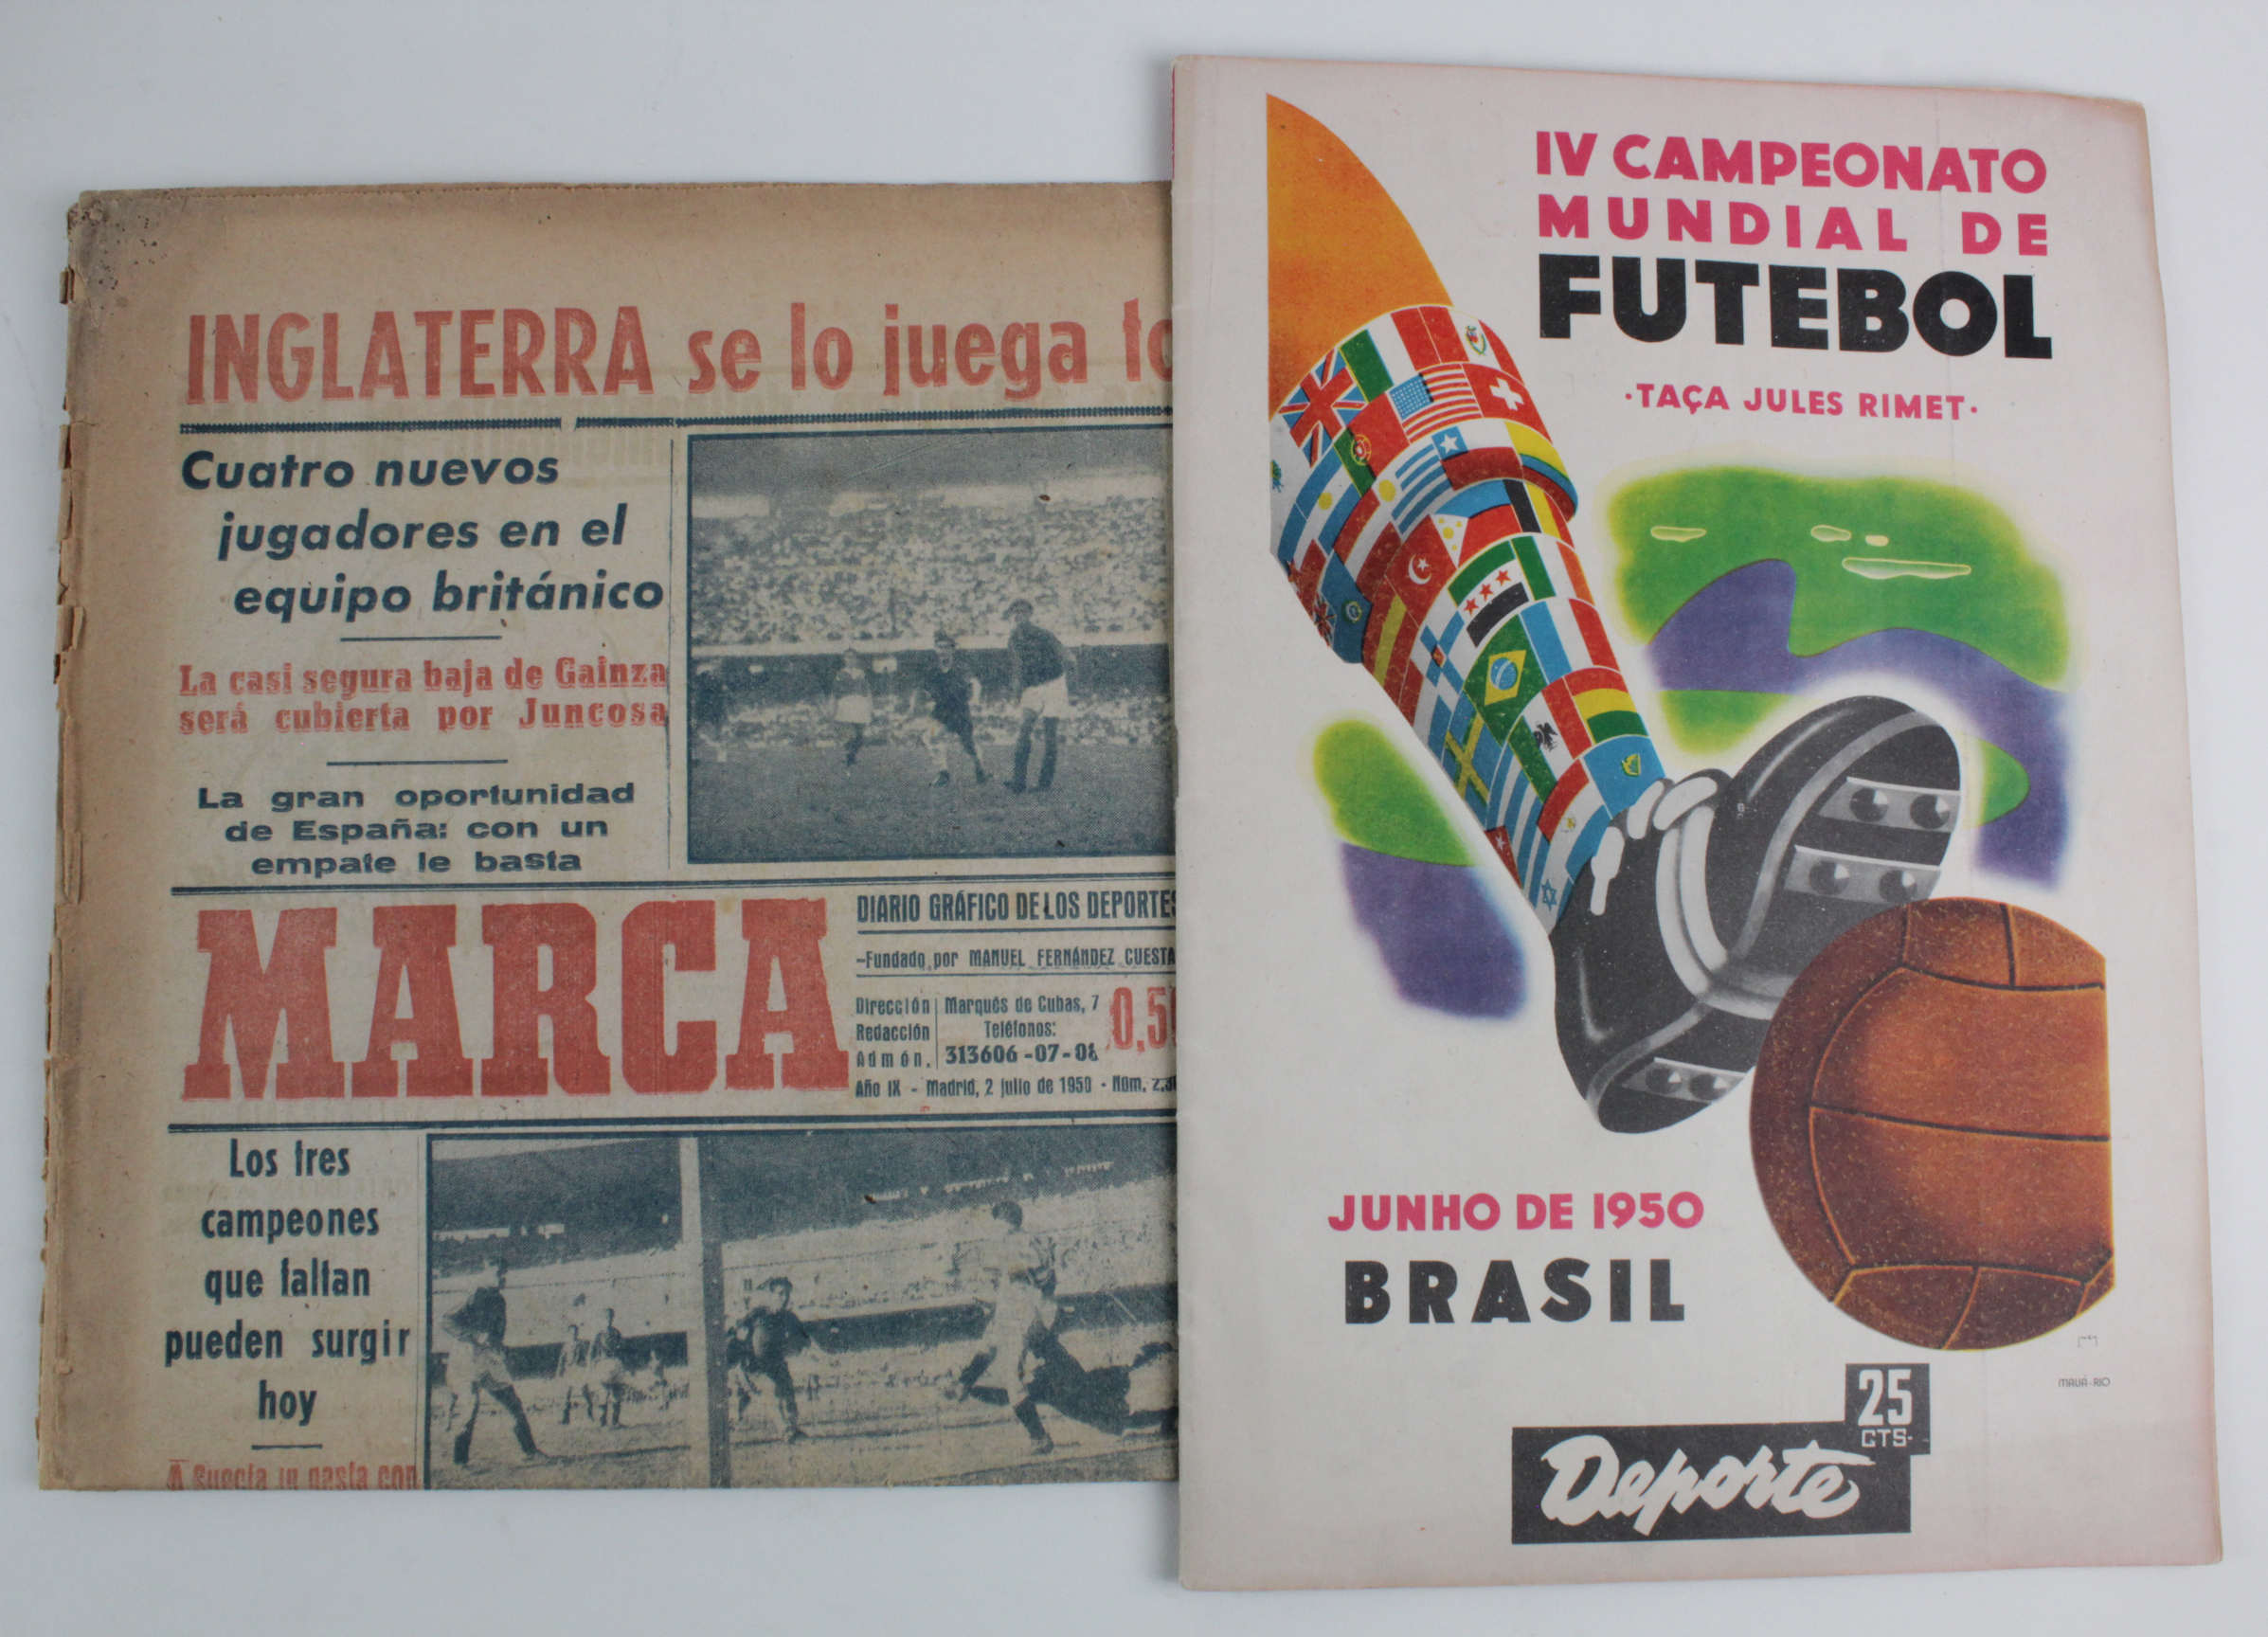 World Cup 1950 Brazil, two publications, Spanish Newspaper Marca 2/7/1950 with coverage Brazil v